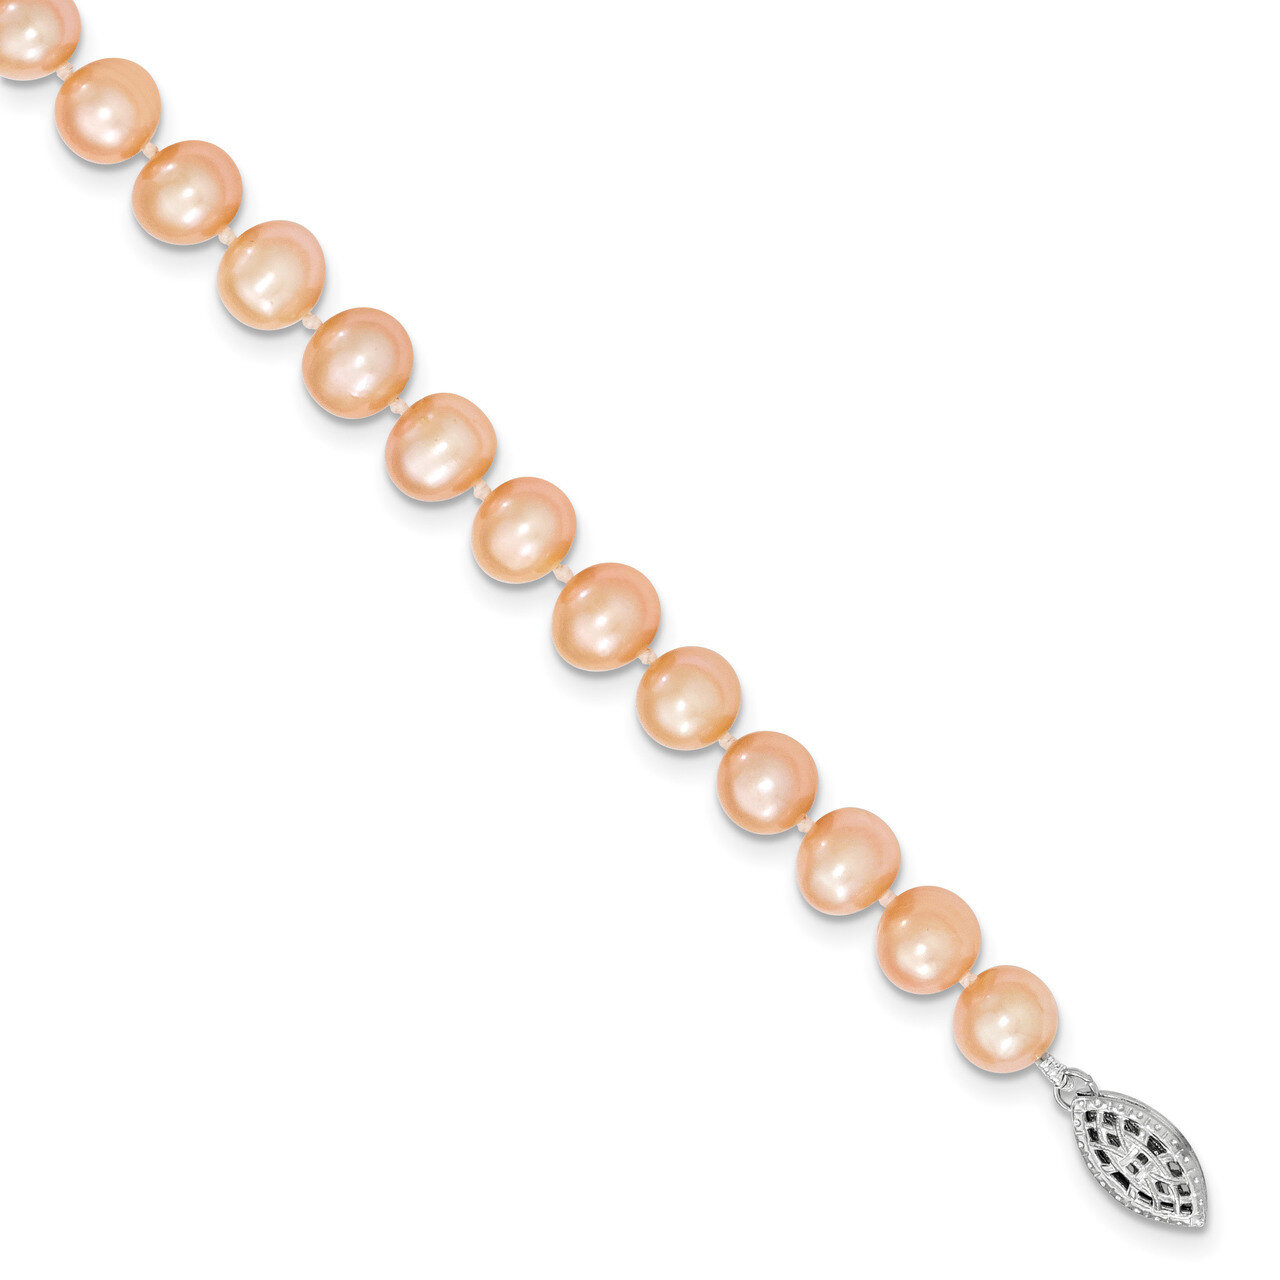 7-8mm Pink Cultured Freshwater Pearl Necklace 18 Inch Sterling Silver Rhodium-plated QH5167-18